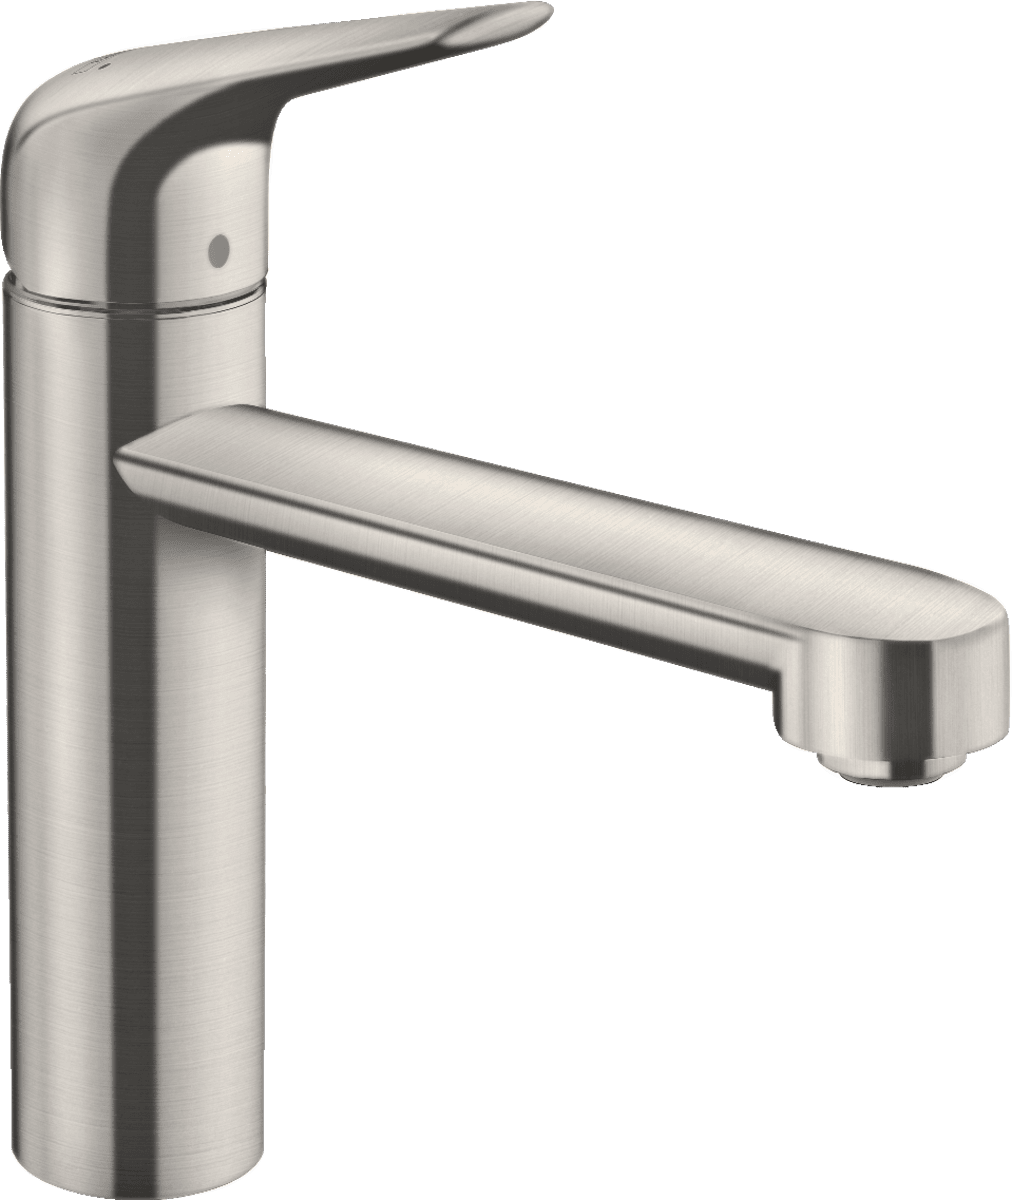 Picture of HANSGROHE Focus M42 Single lever kitchen mixer 120, 1jet #71806800 - Stainless Steel Finish